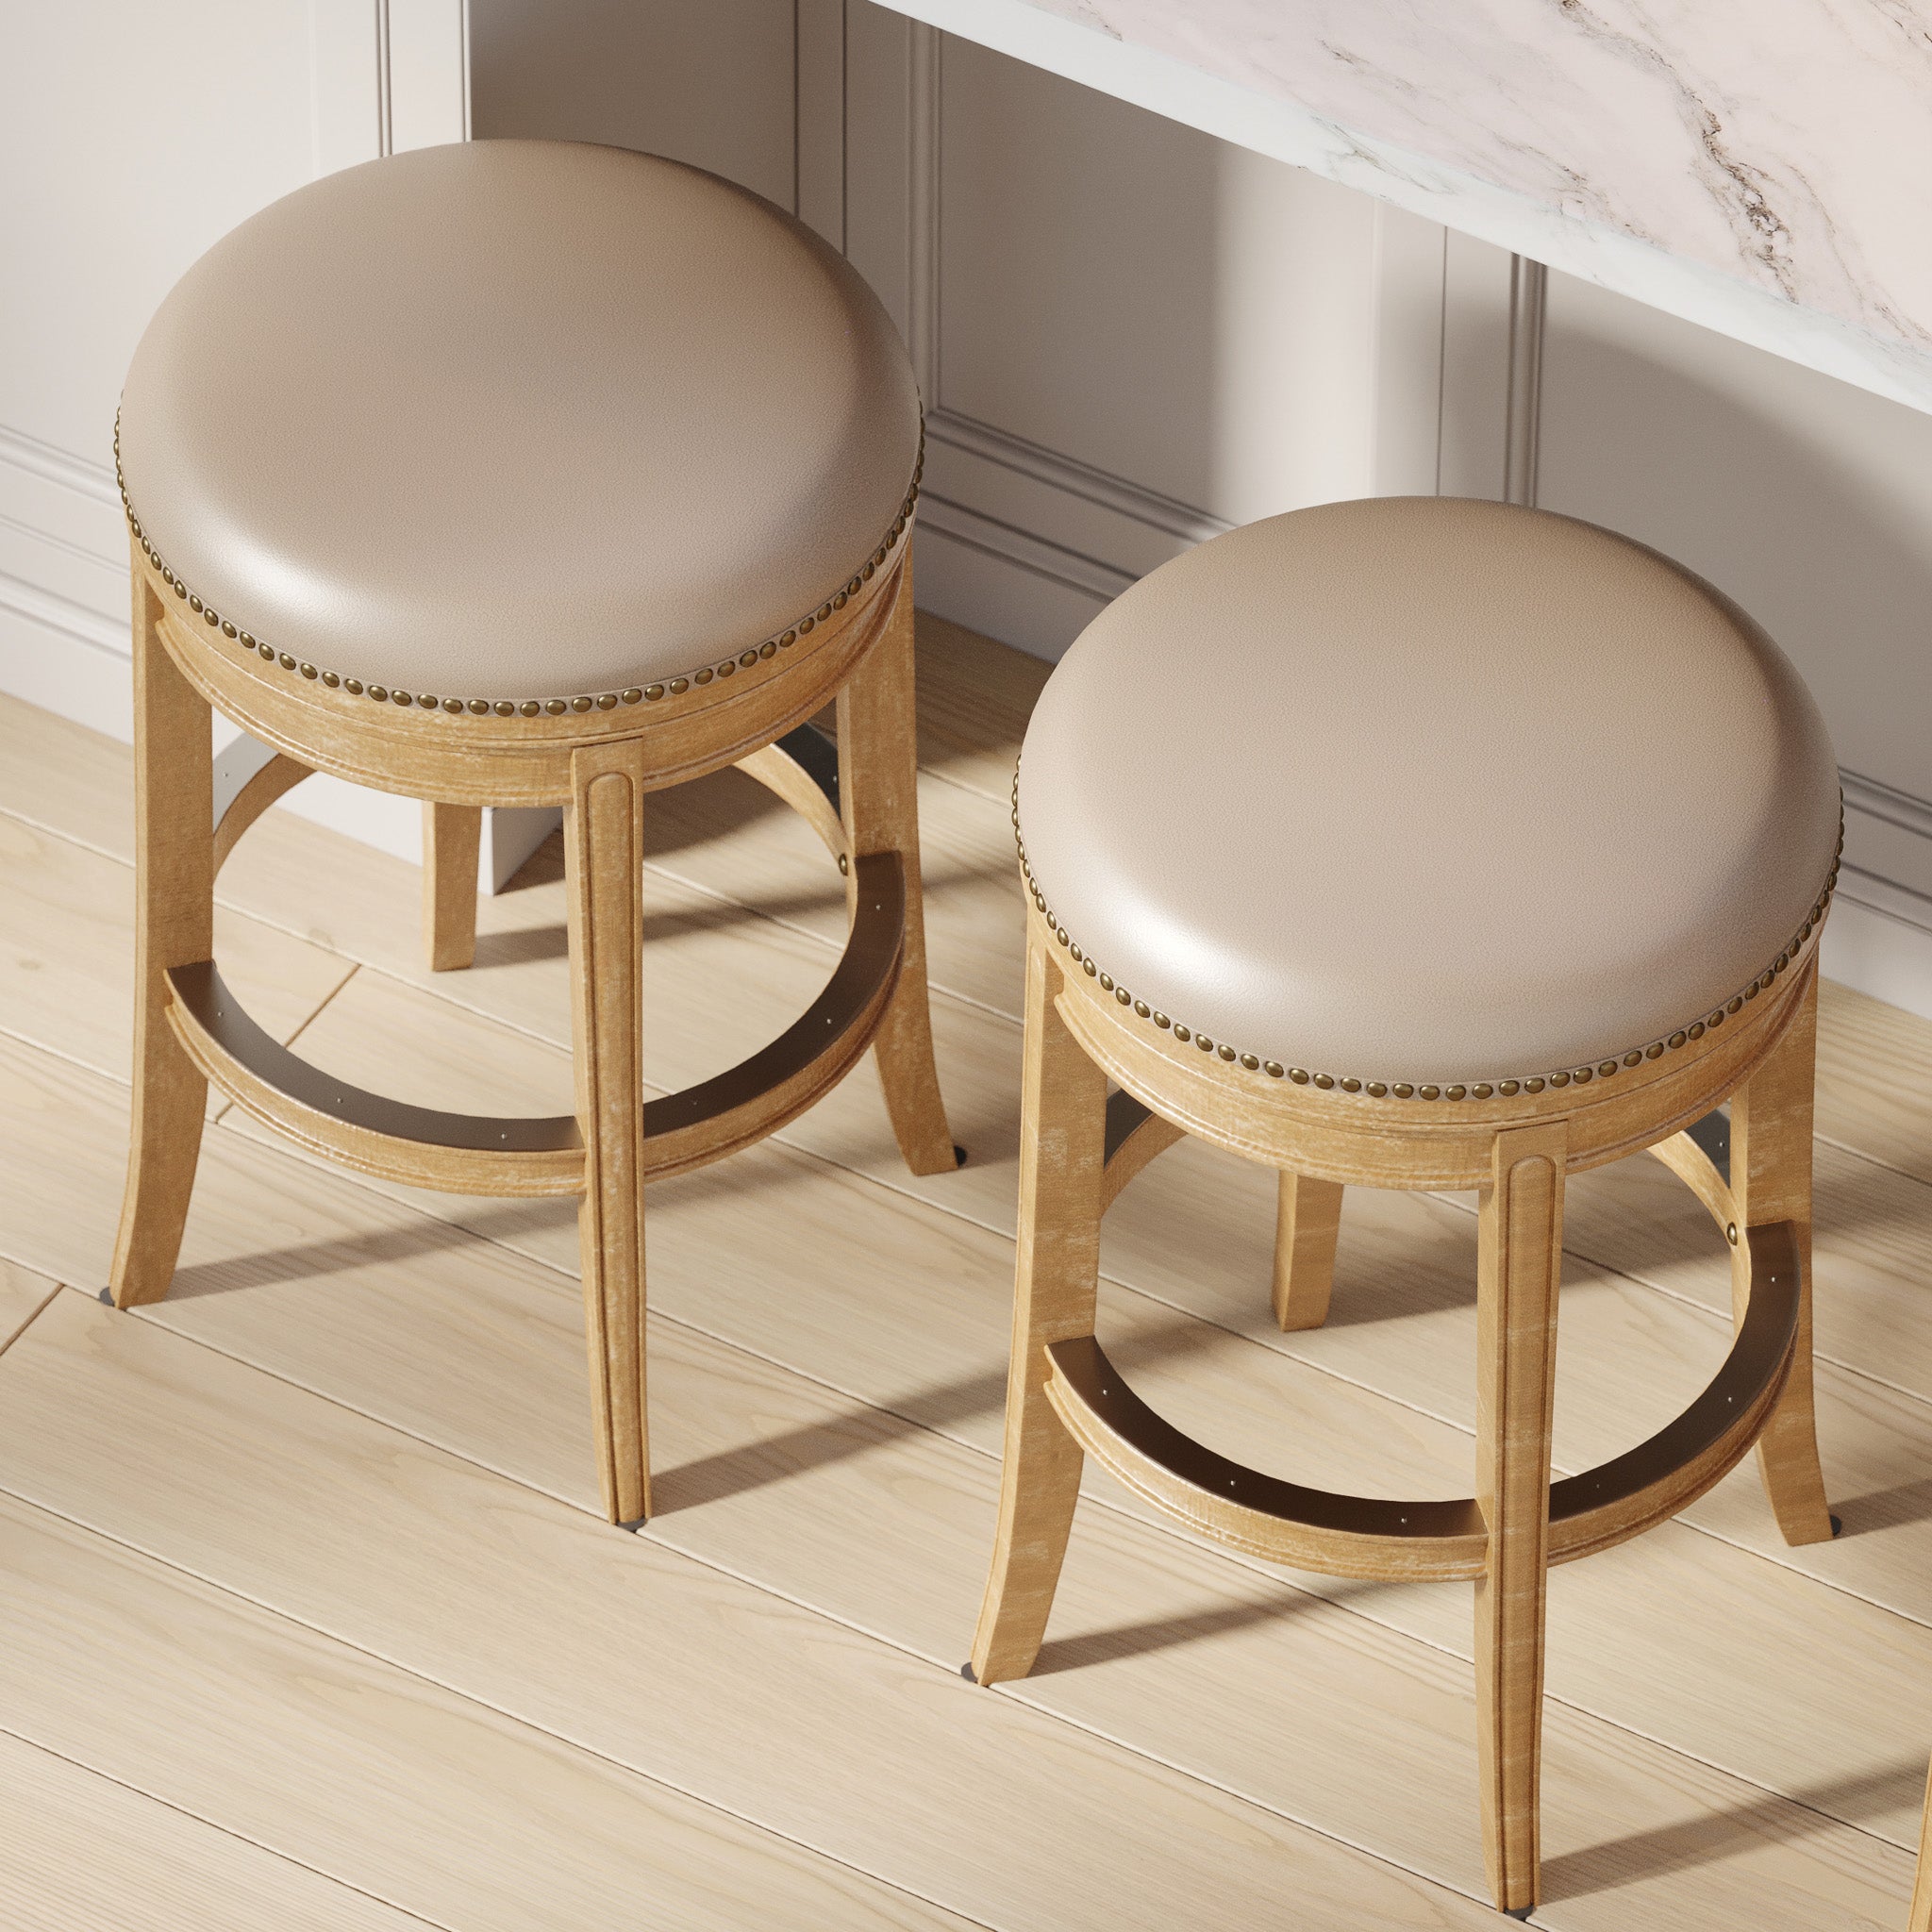 Alexander Backless Bar Stool in Weathered Oak Finish with Avanti Bone Vegan Leather in Stools by Maven Lane